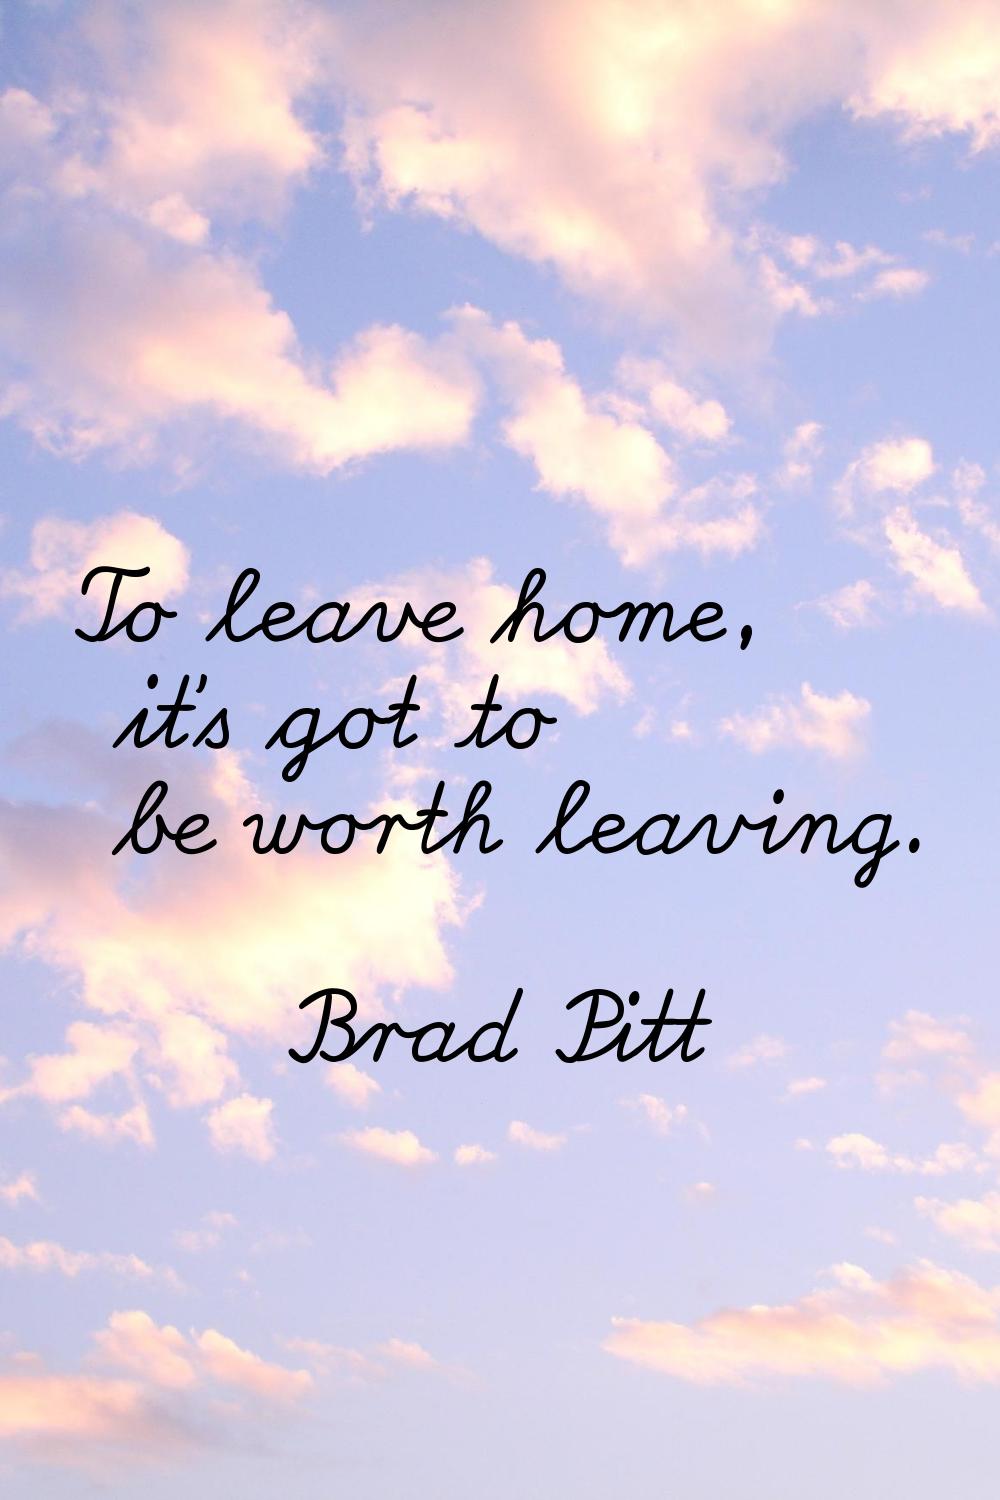 To leave home, it's got to be worth leaving.